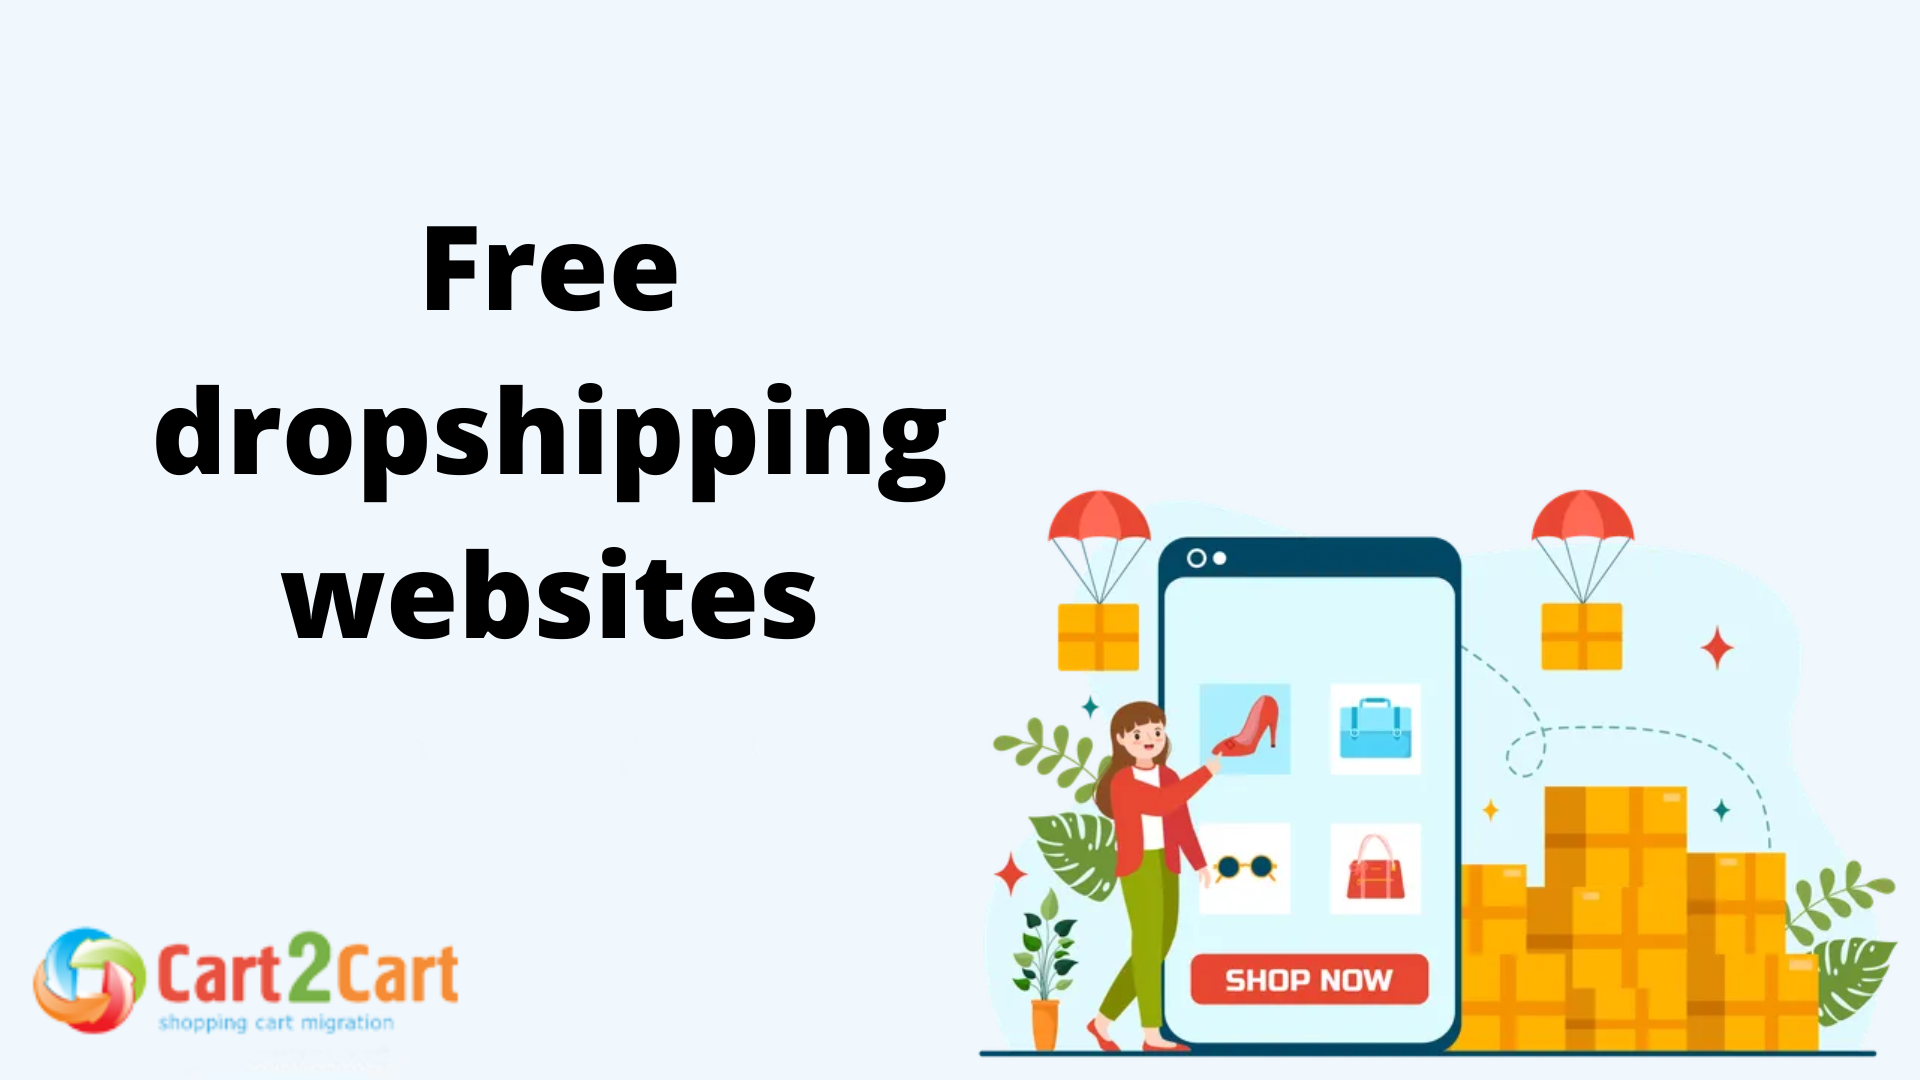 Free dropshipping websites